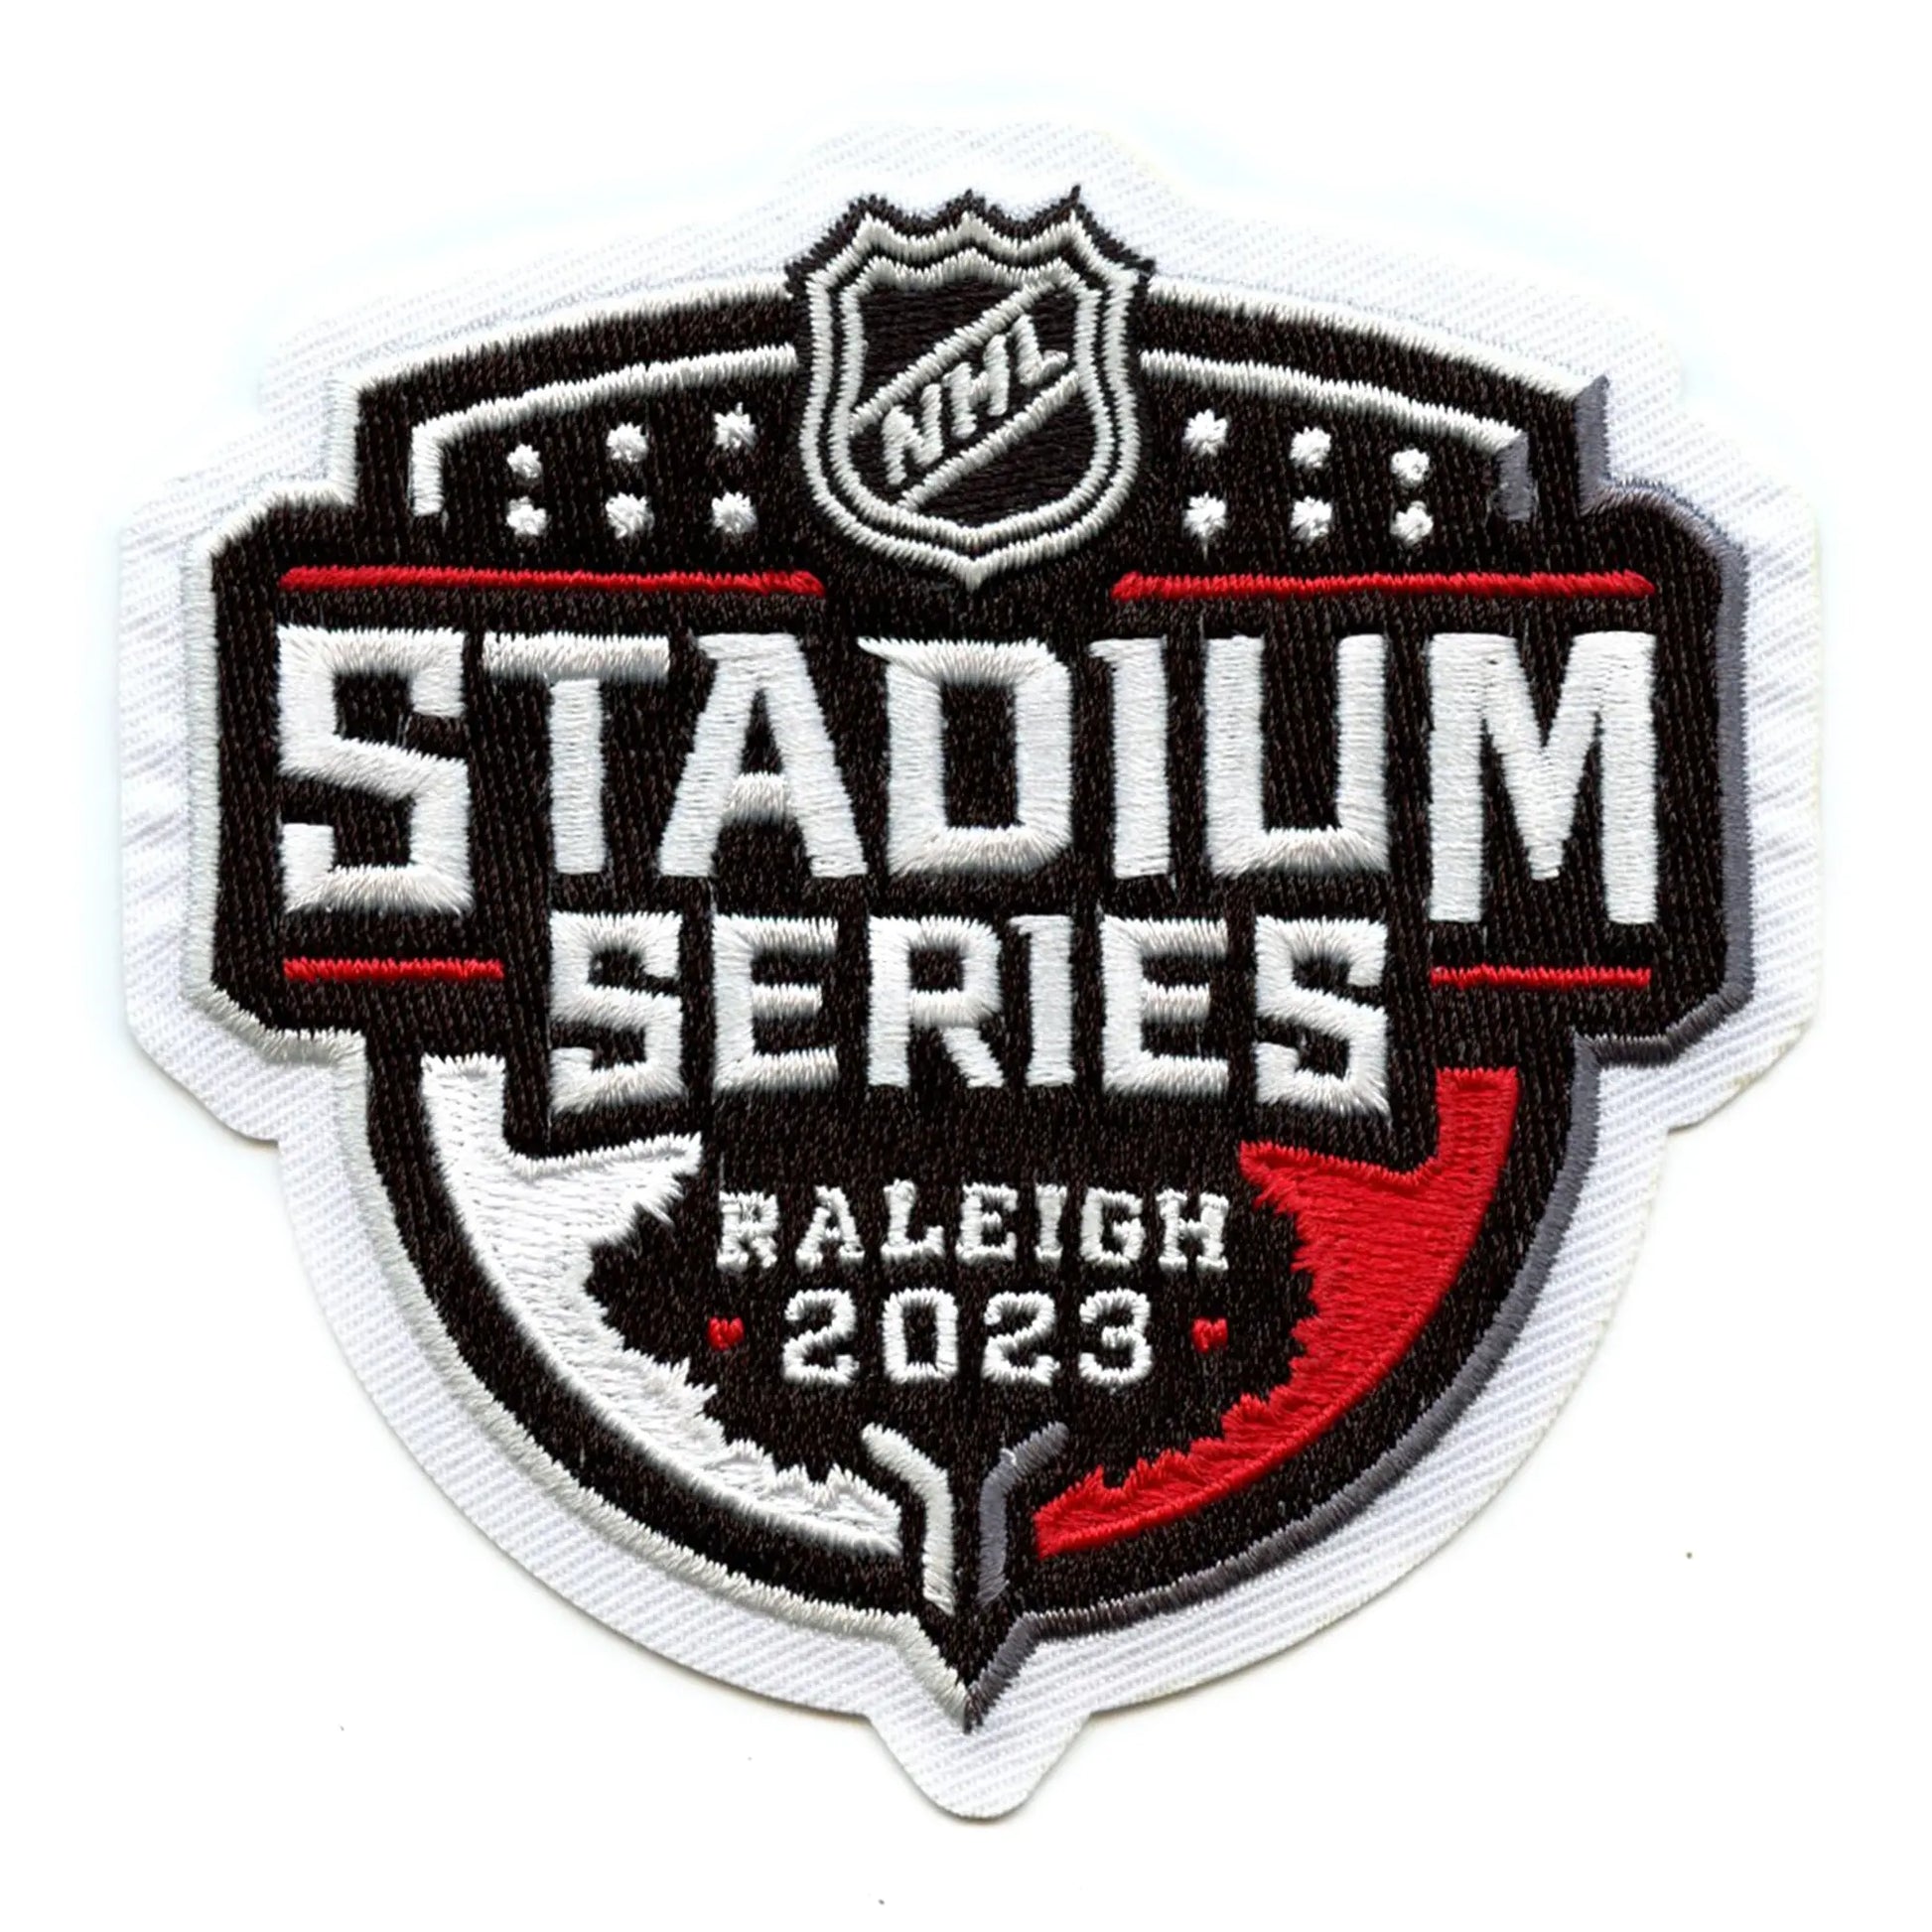 NHL's Official Release Of Jerseys For 2023 NHL Stadium Series Between  Capitals, Carolina